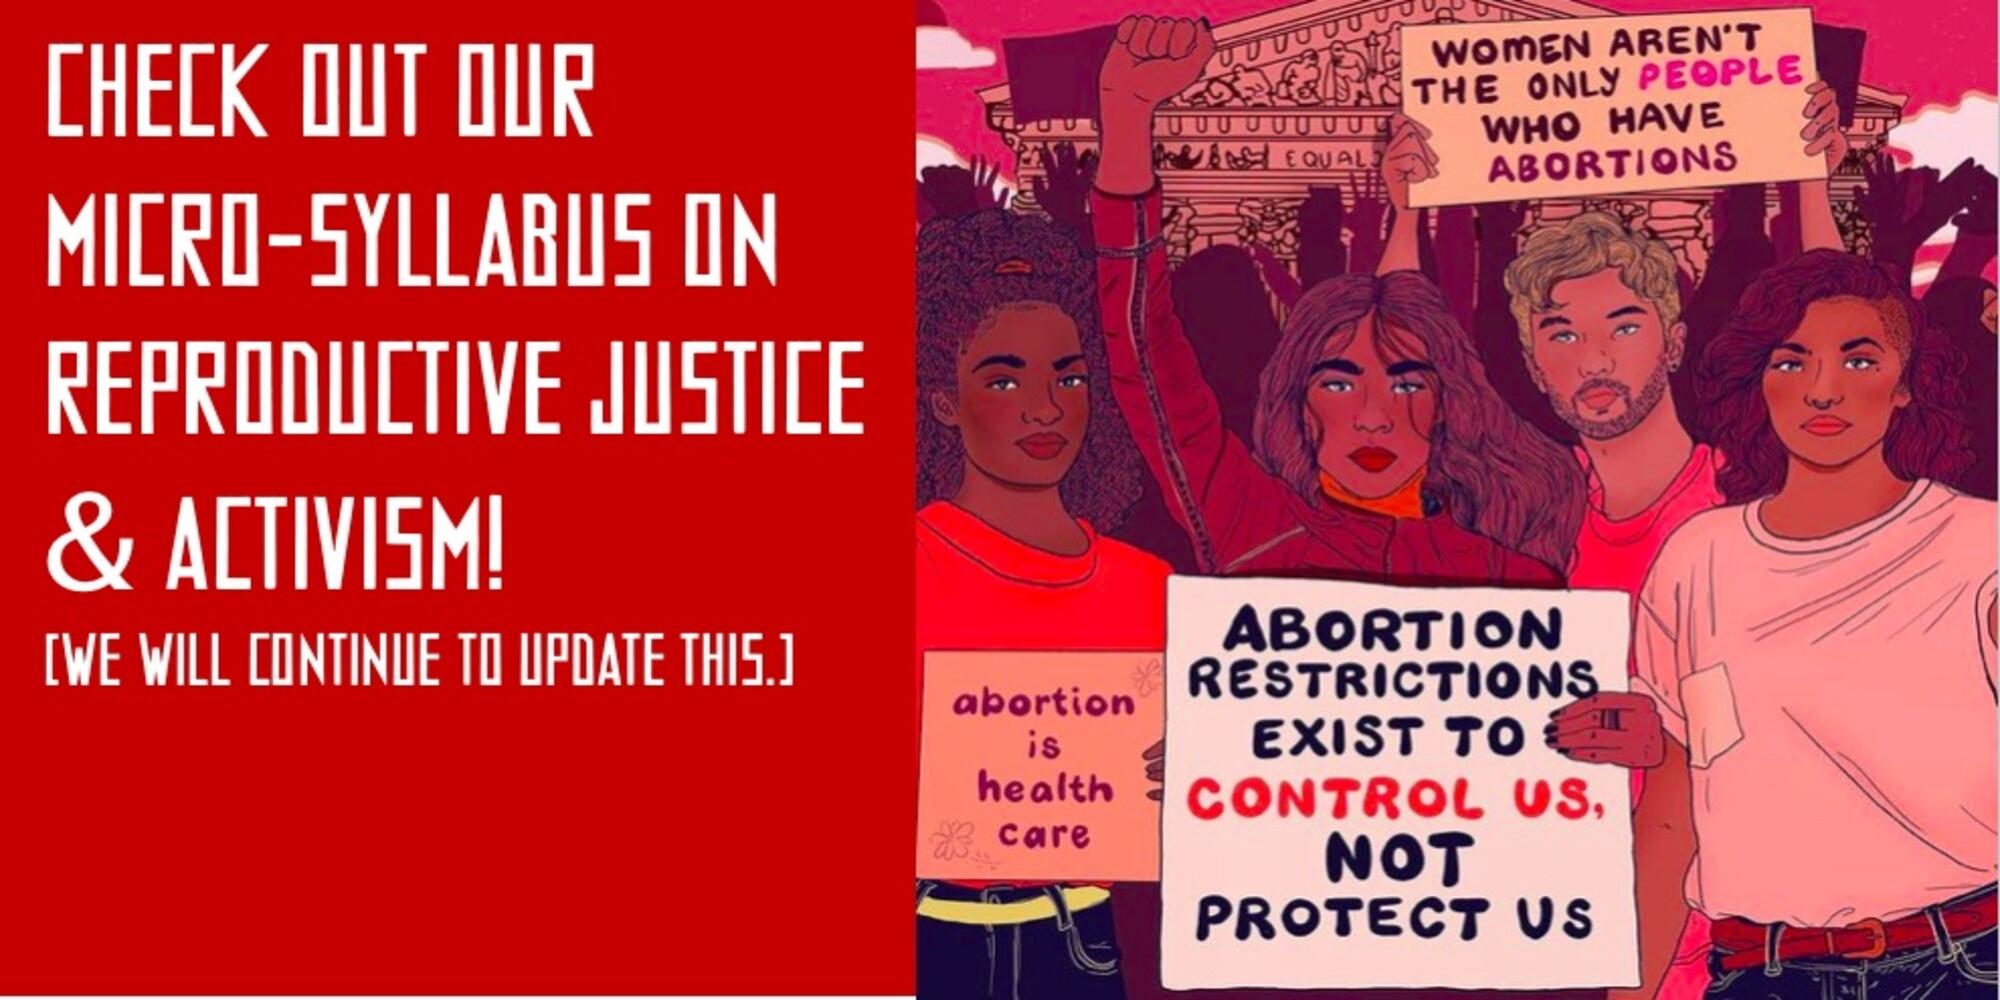 Red image with "Check Out Our Micro-Syllabus on Reproductive Justice and Activism!" and an image from Liberal Jane of protesters in front of the Supreme Court.